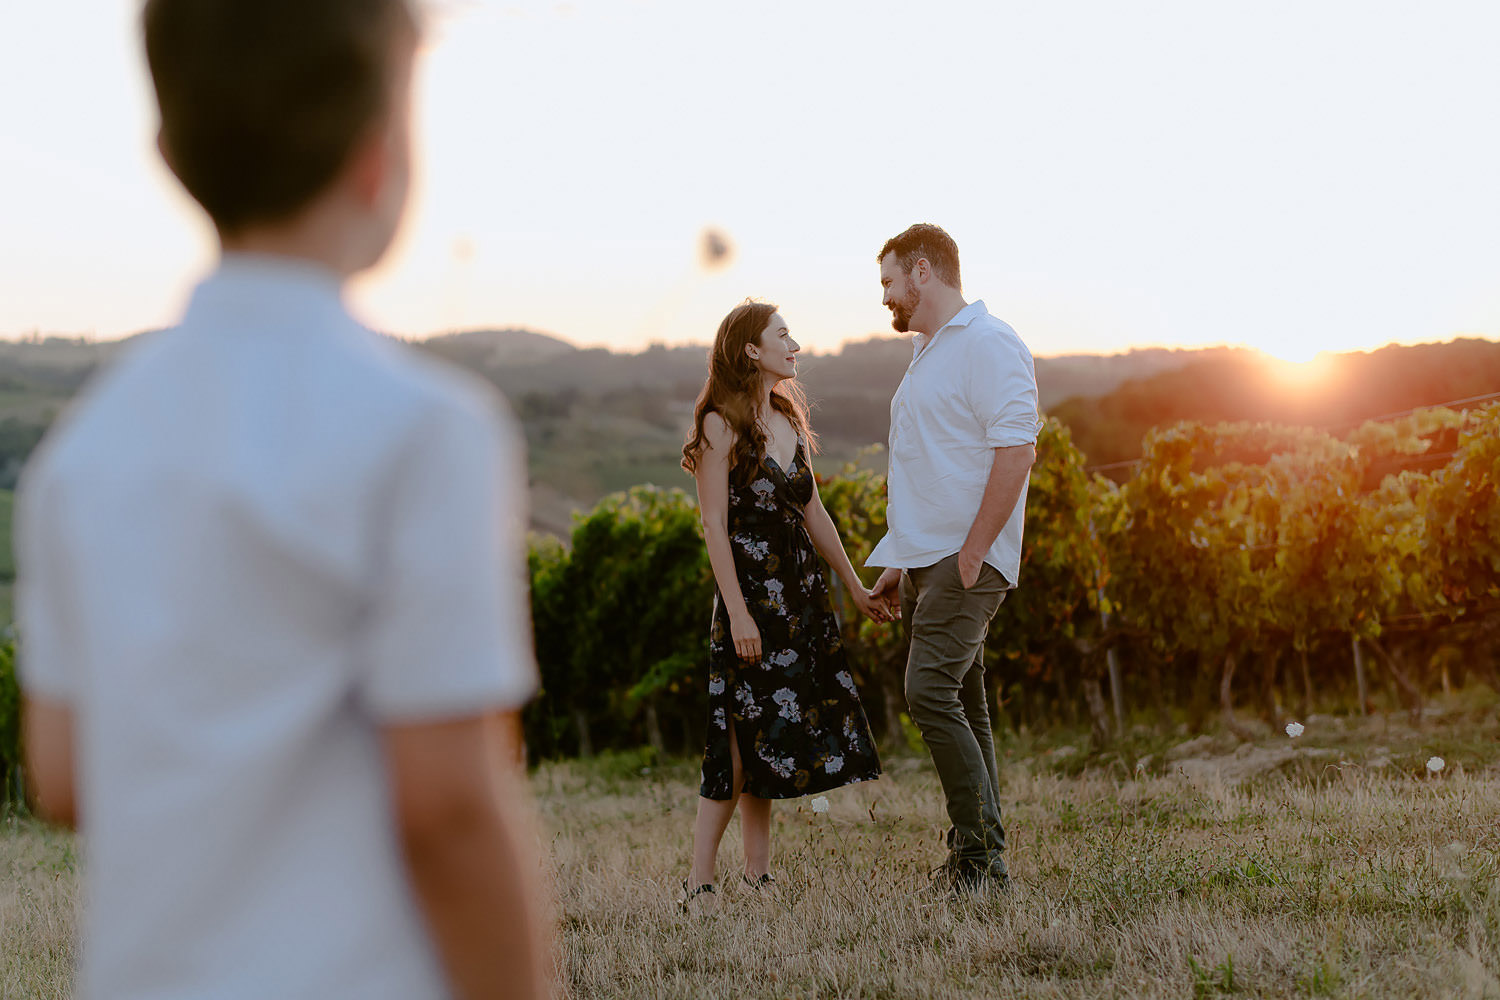 family photographer florence tuscany countryside sunset modern timeless editorial romantic